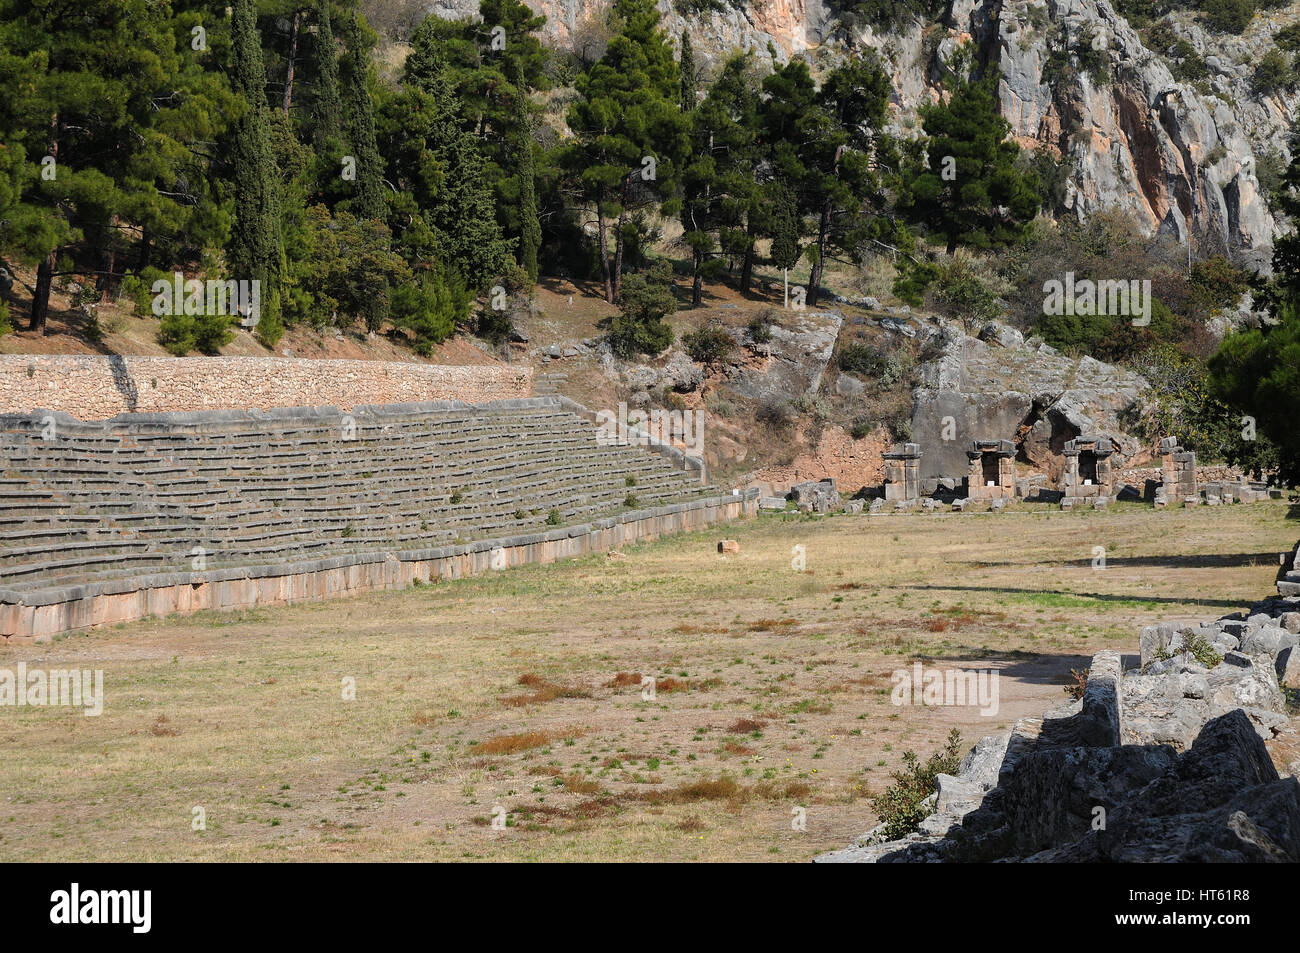 Ancient stadium at Delfi archaeological site in Greece Stock Photo